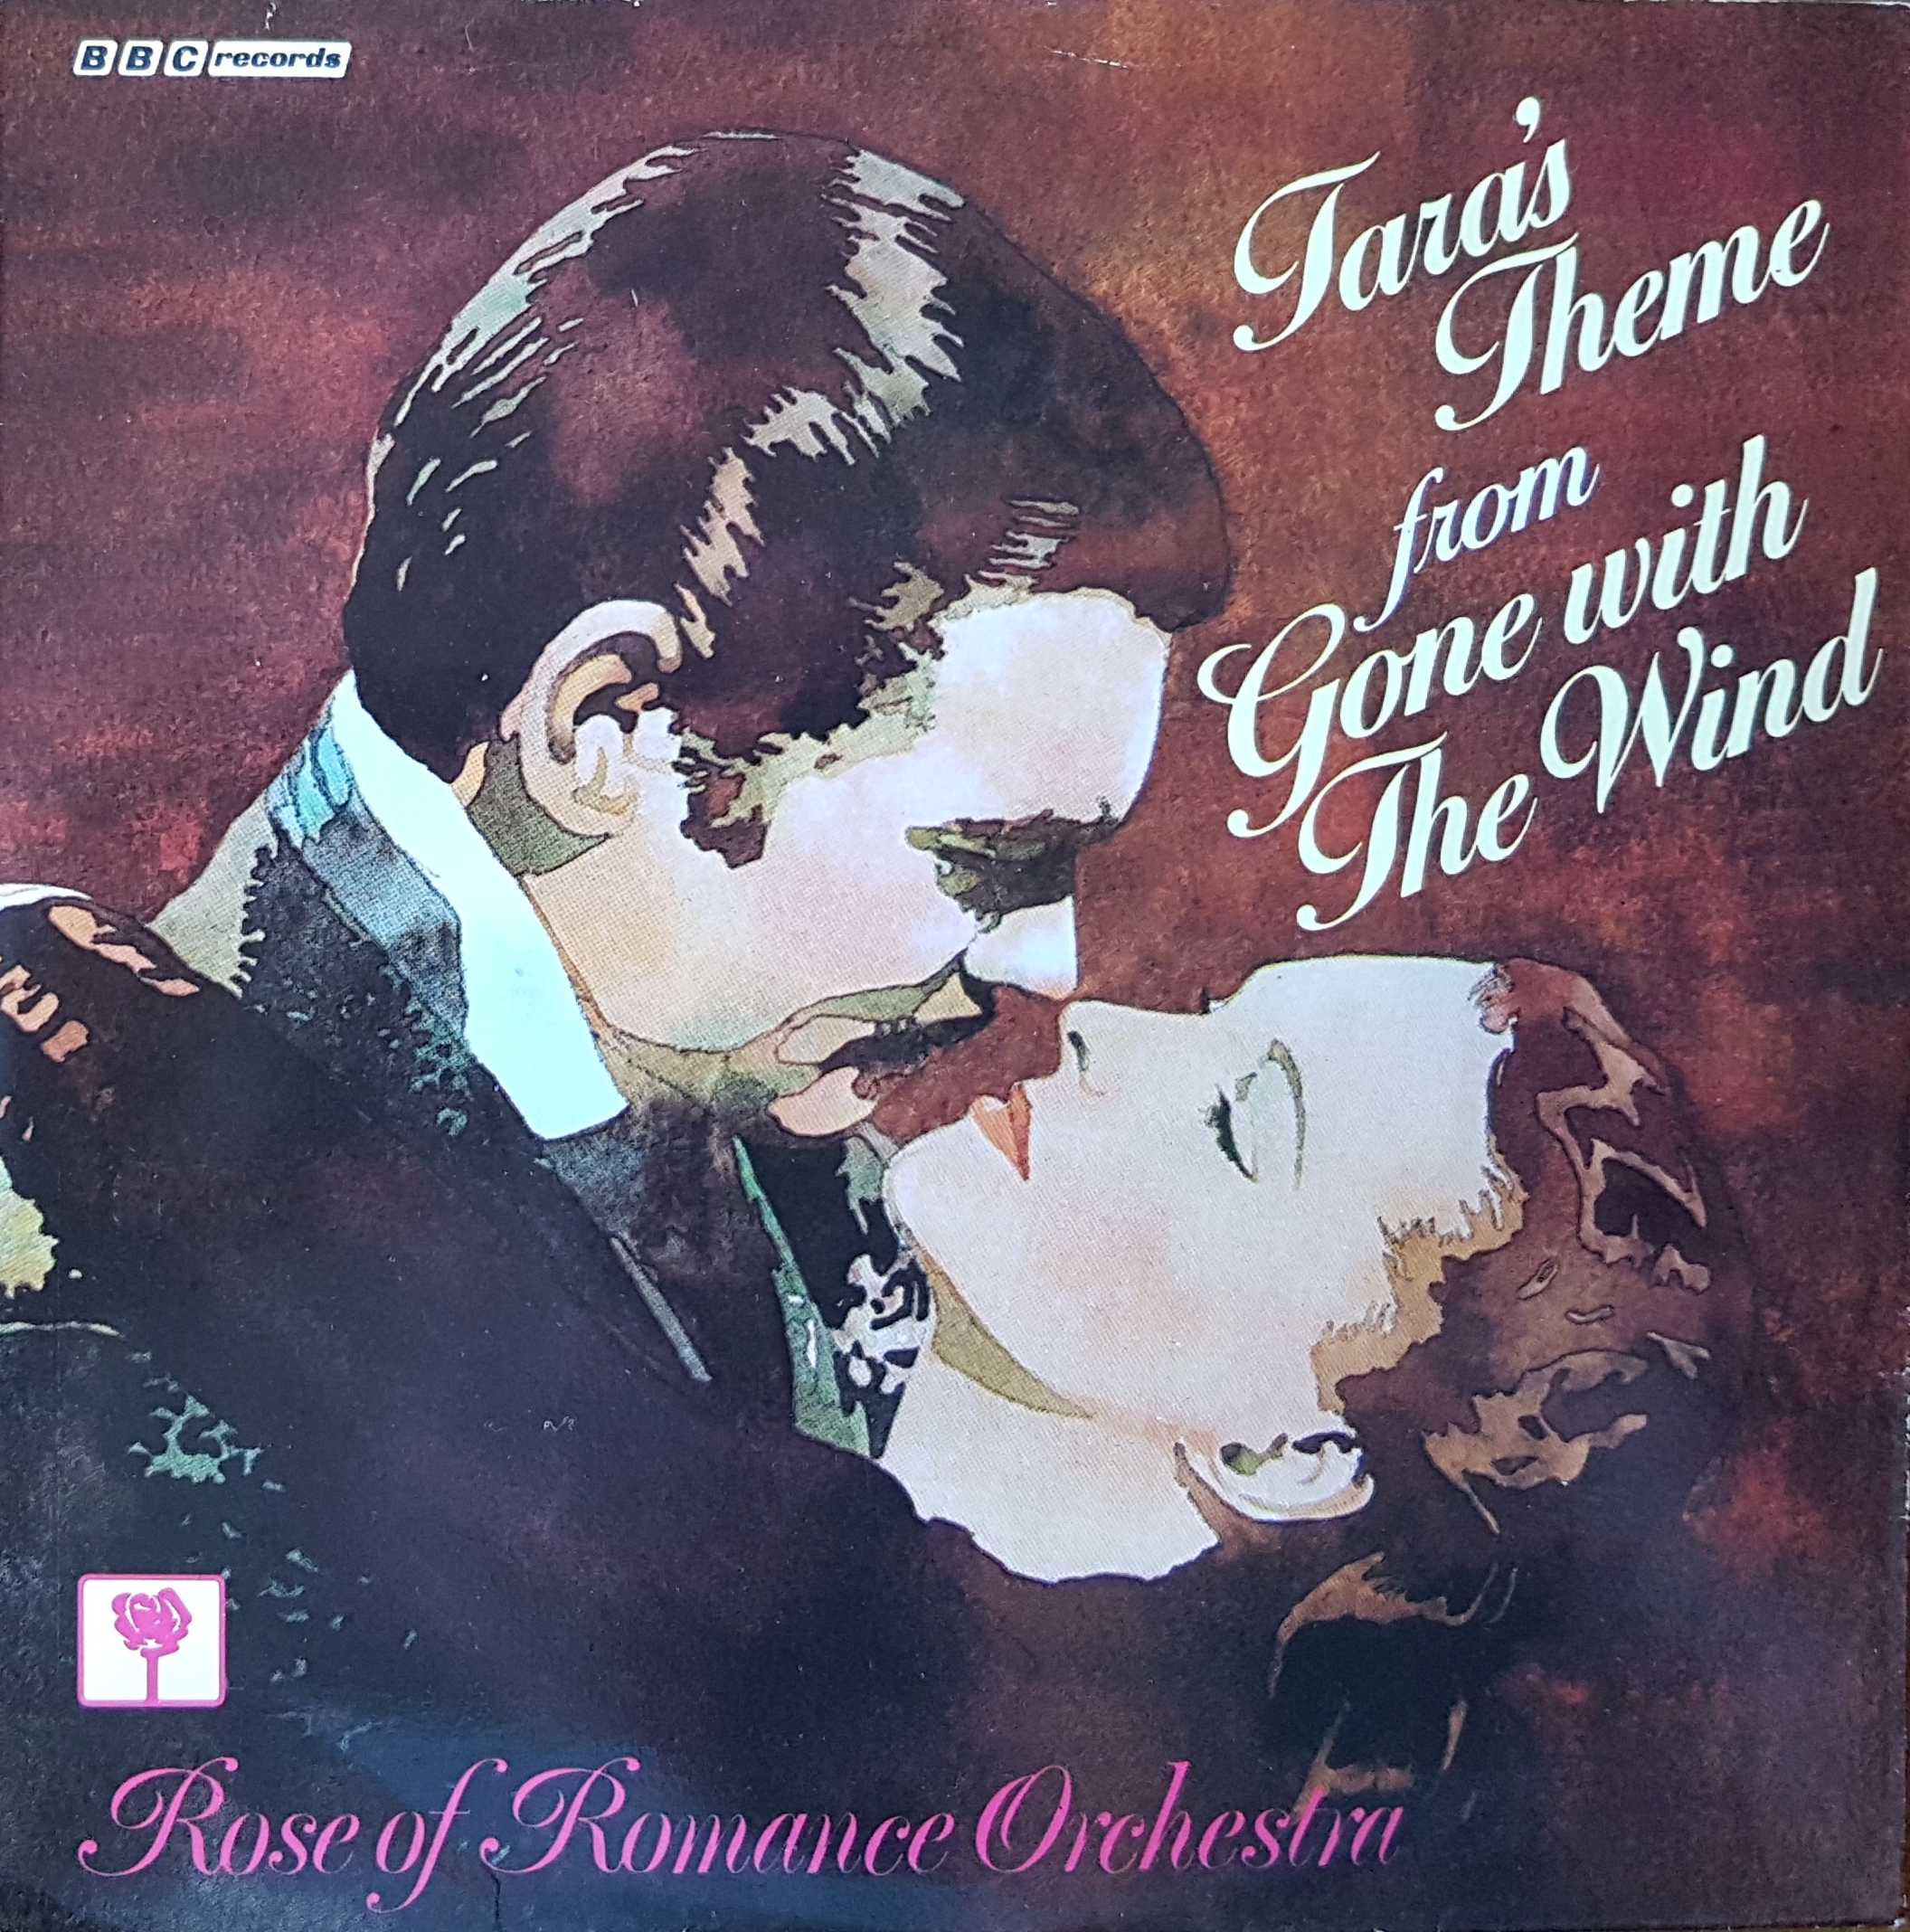 Picture of RESL 108 Tara's theme (Gone with the wind) by artist M. Steiner / M.Huckridge from the BBC singles - Records and Tapes library